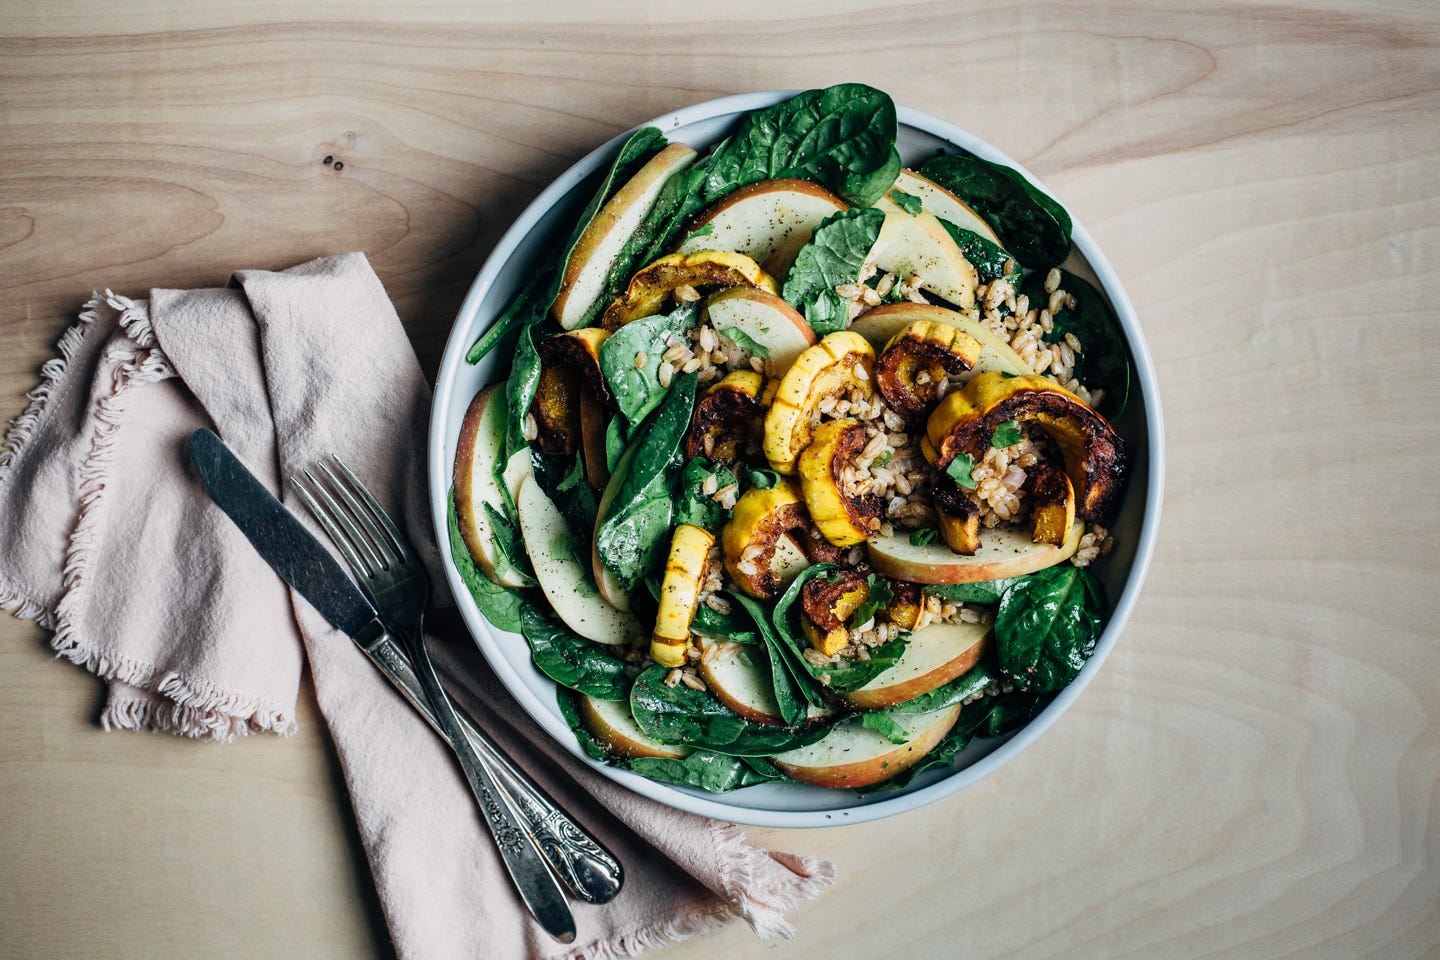 A salad bowl filled with greens, farro, apples, and roasted squash